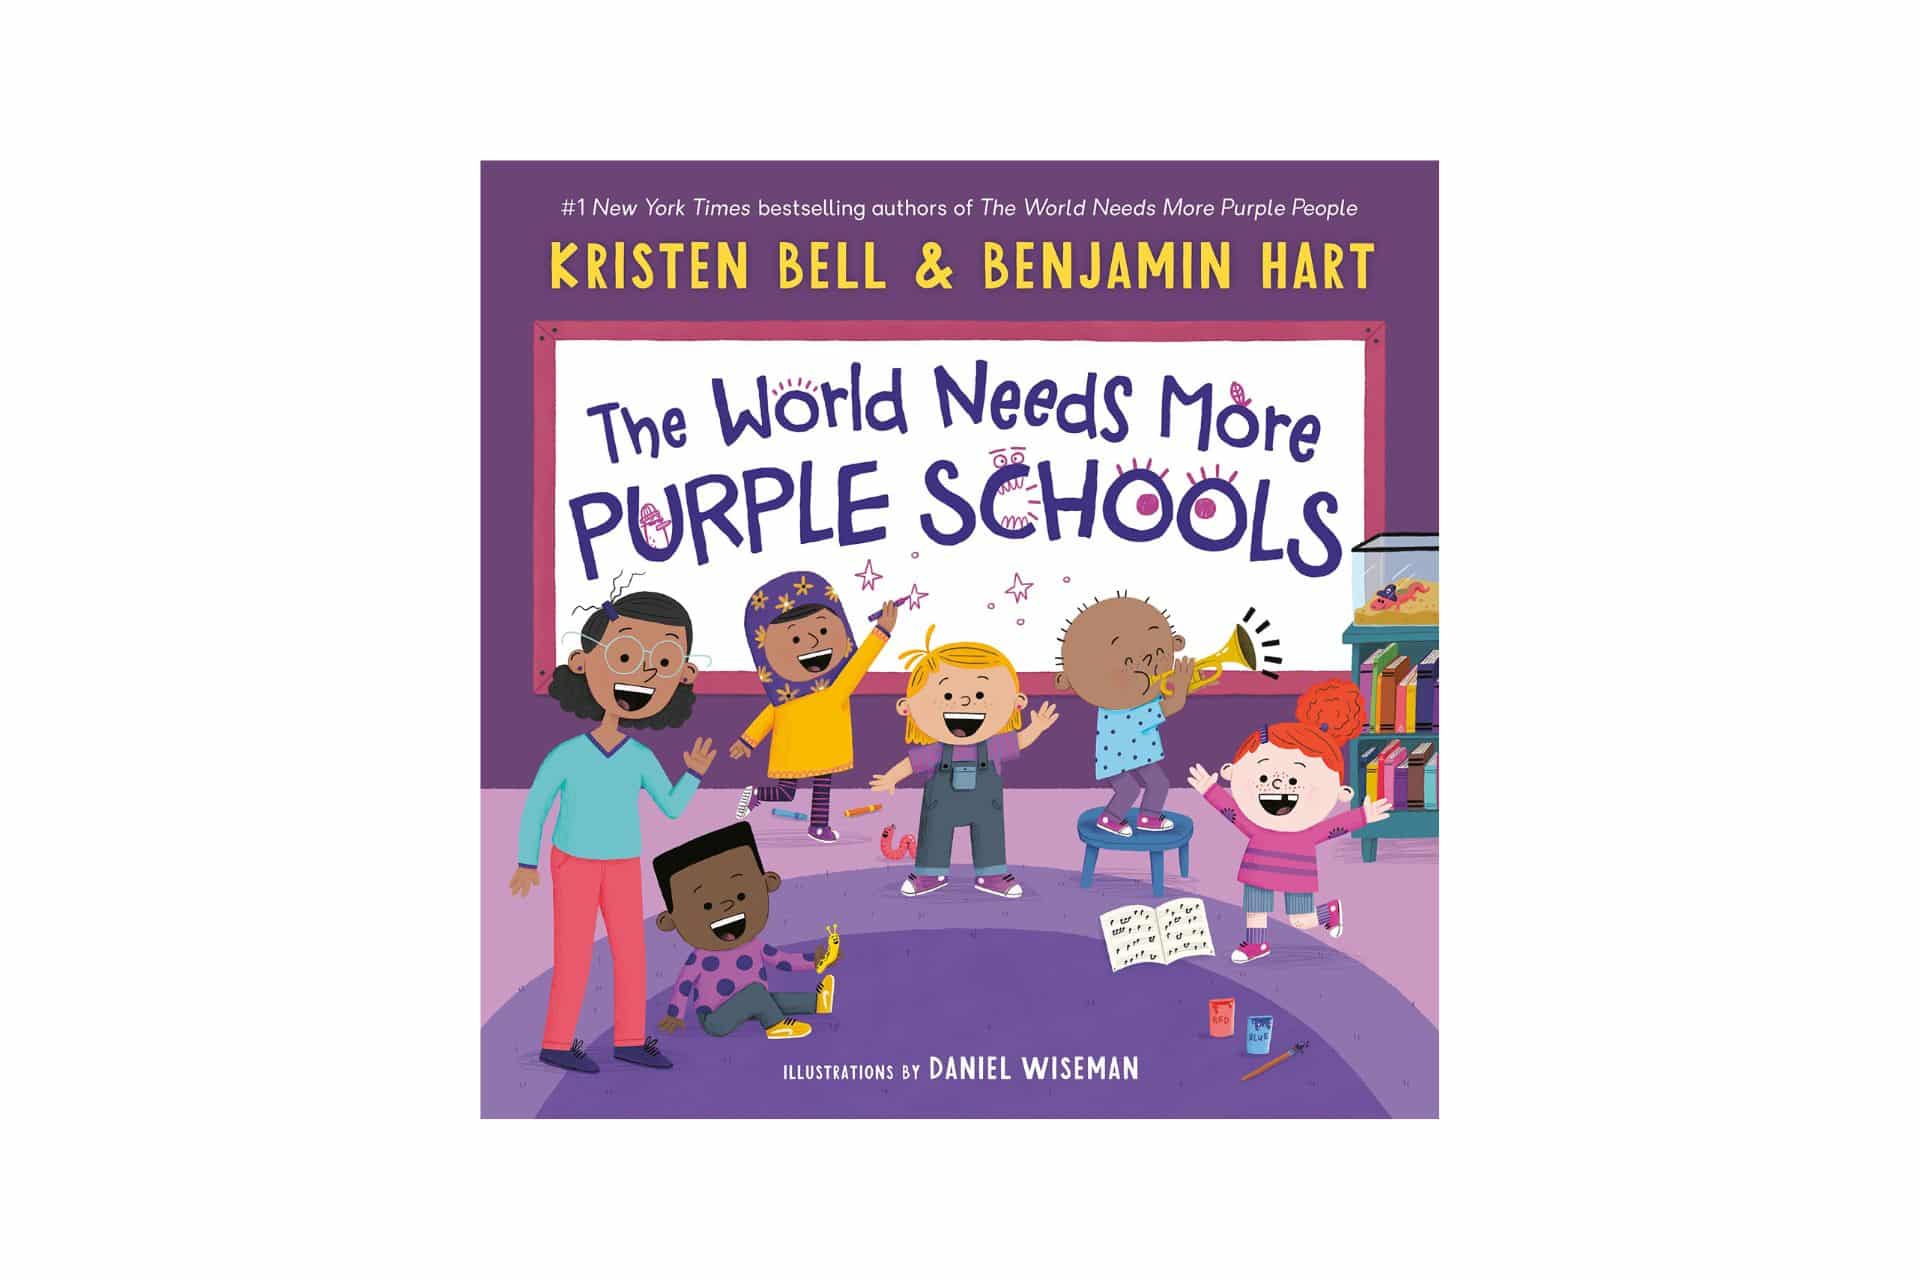 Book cover with heavy purple details and kids of diversity playing